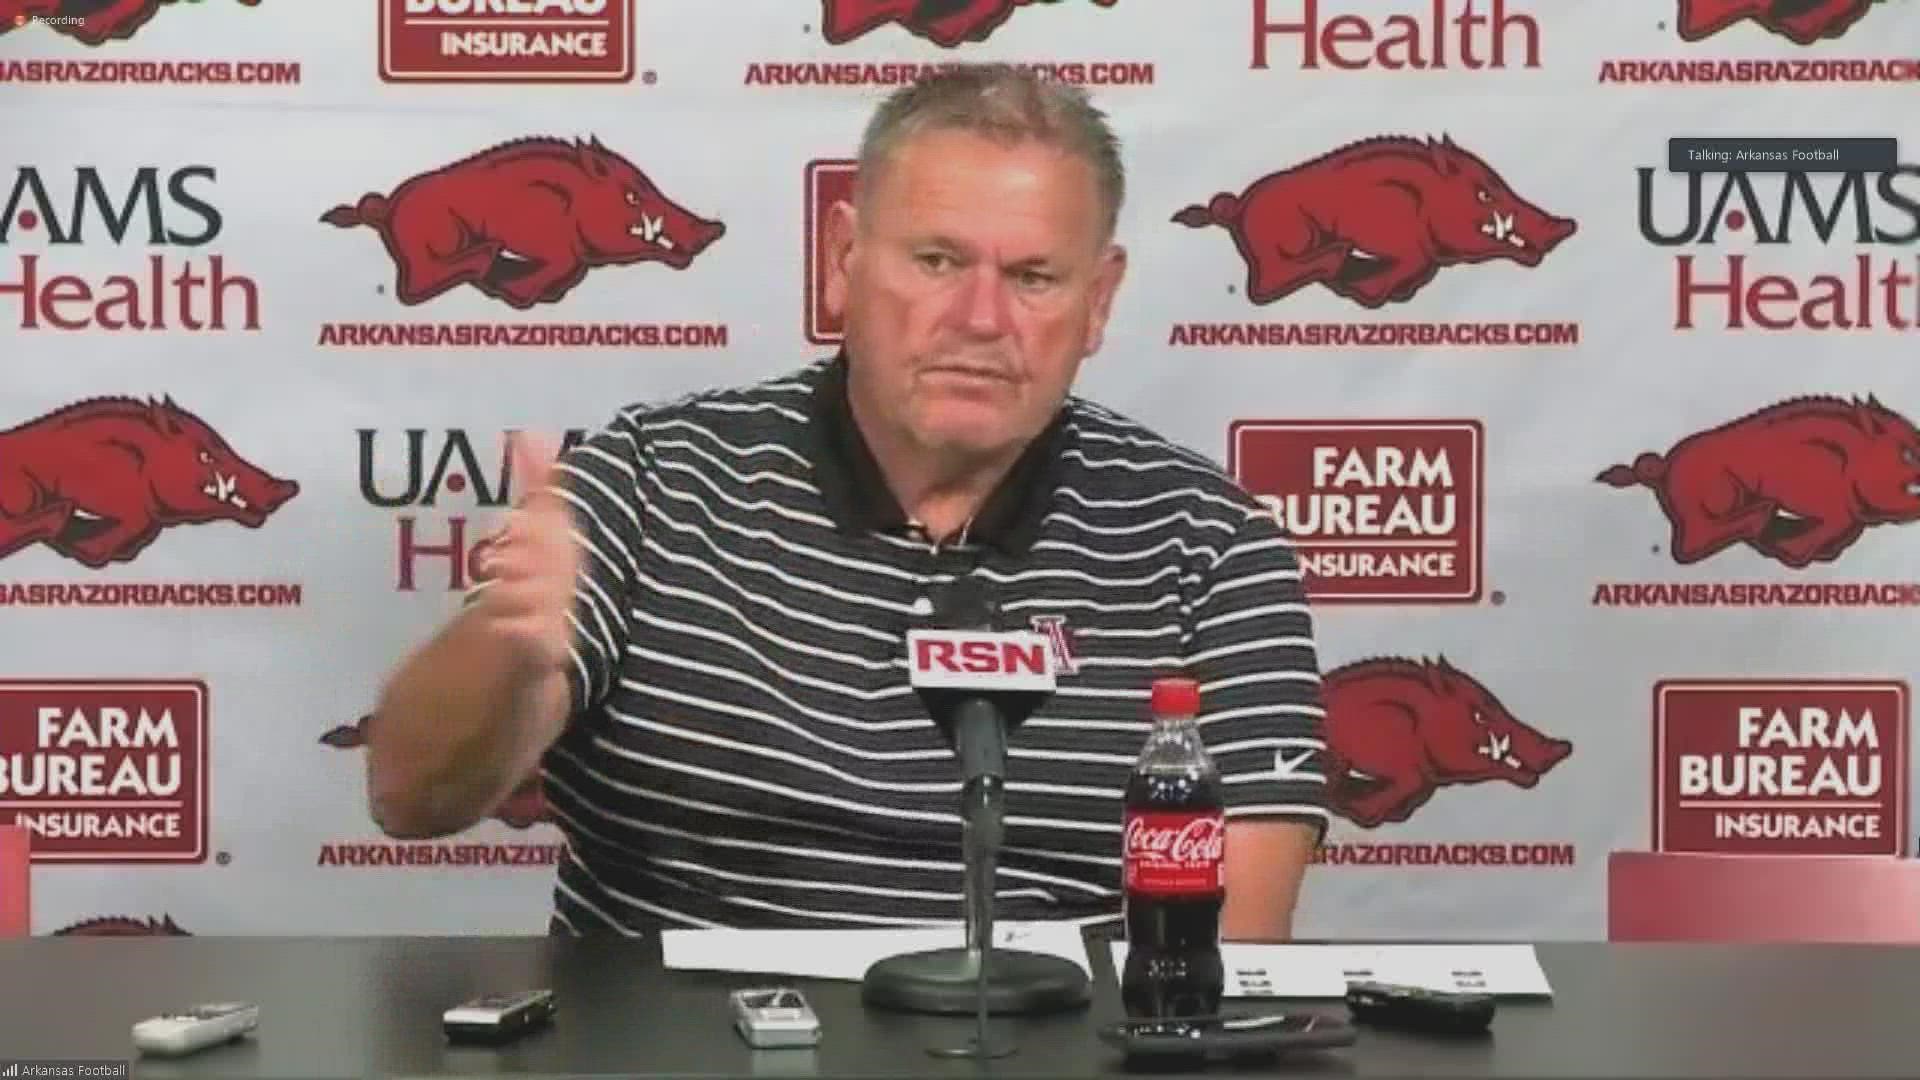 Razorback head coach Sam Pittman talks to media about preparing for Saturday's matchup against Alabama after a tough loss to A&M.